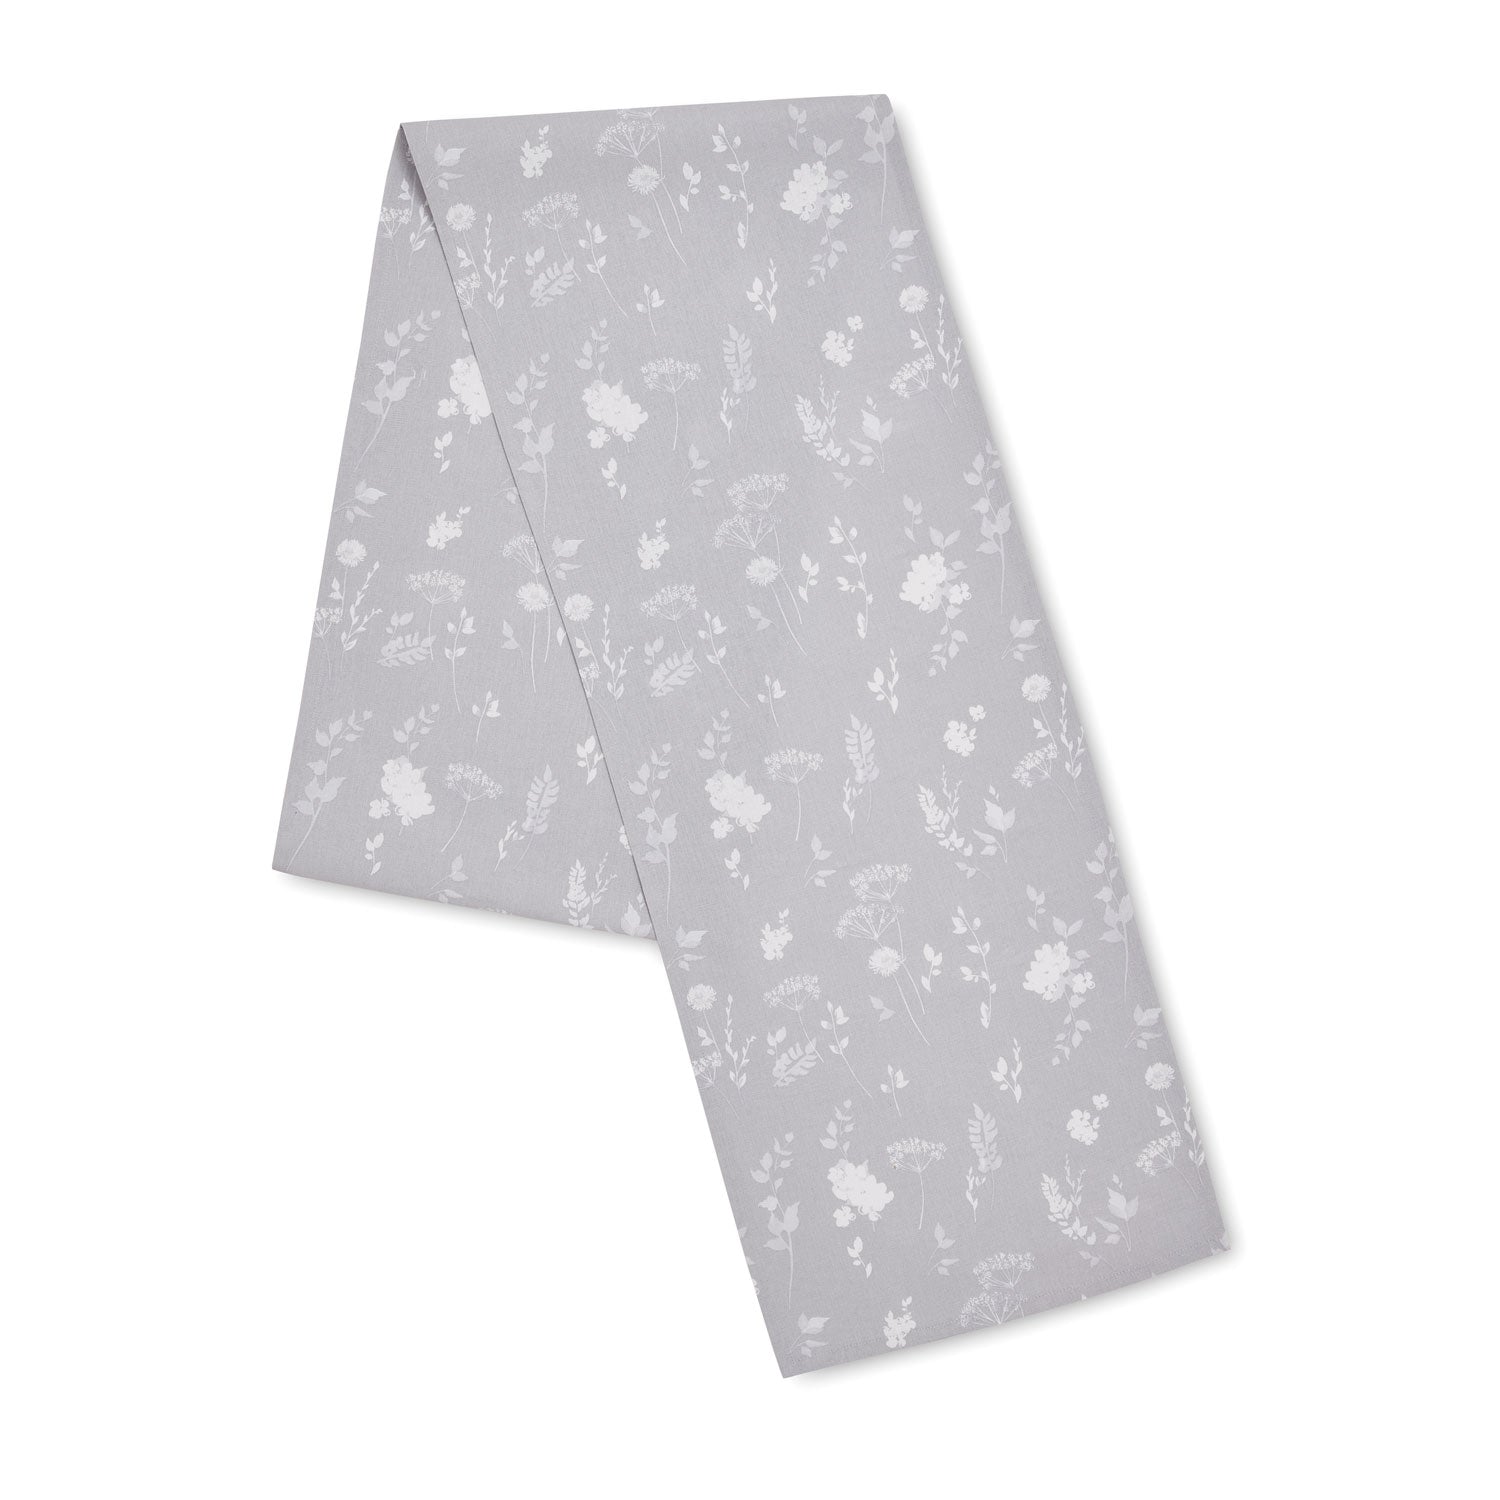 Catherine Lansfield Dining Meadowsweet Floral Table Runner - White / Grey 1 Shaws Department Stores